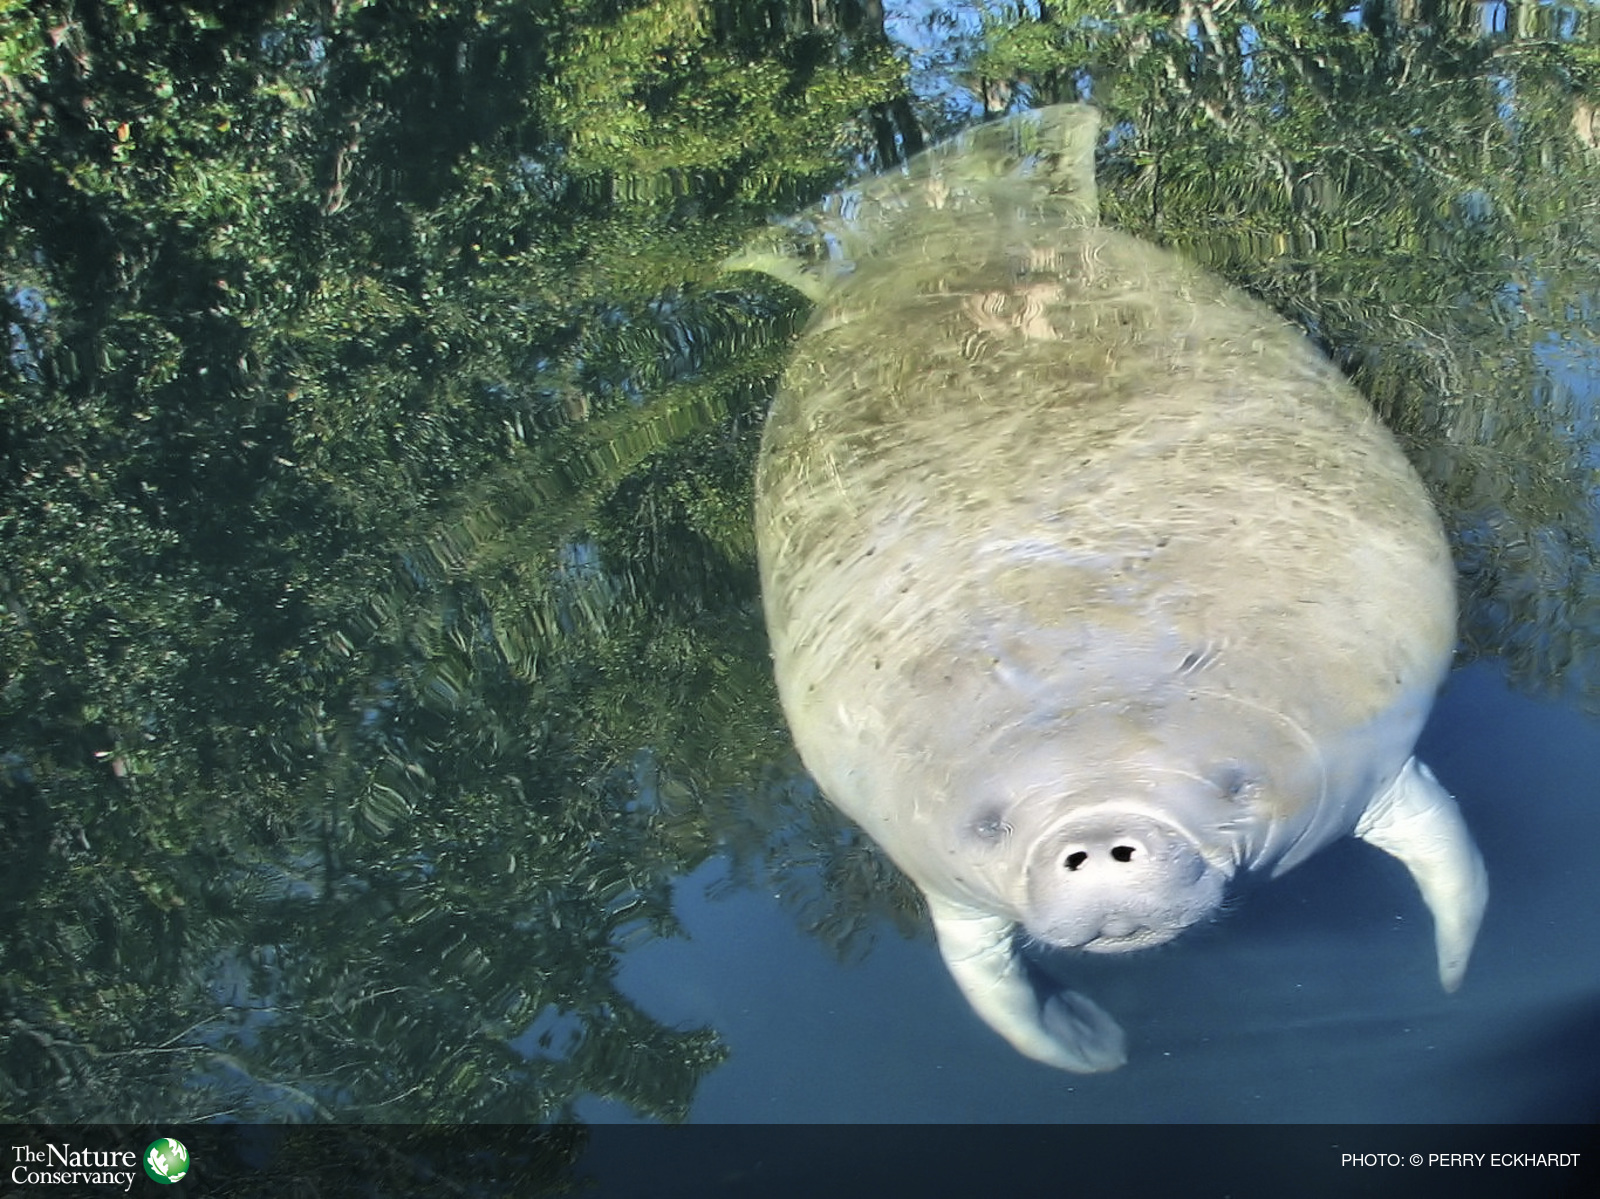 Manatee by Perry Eckhardt